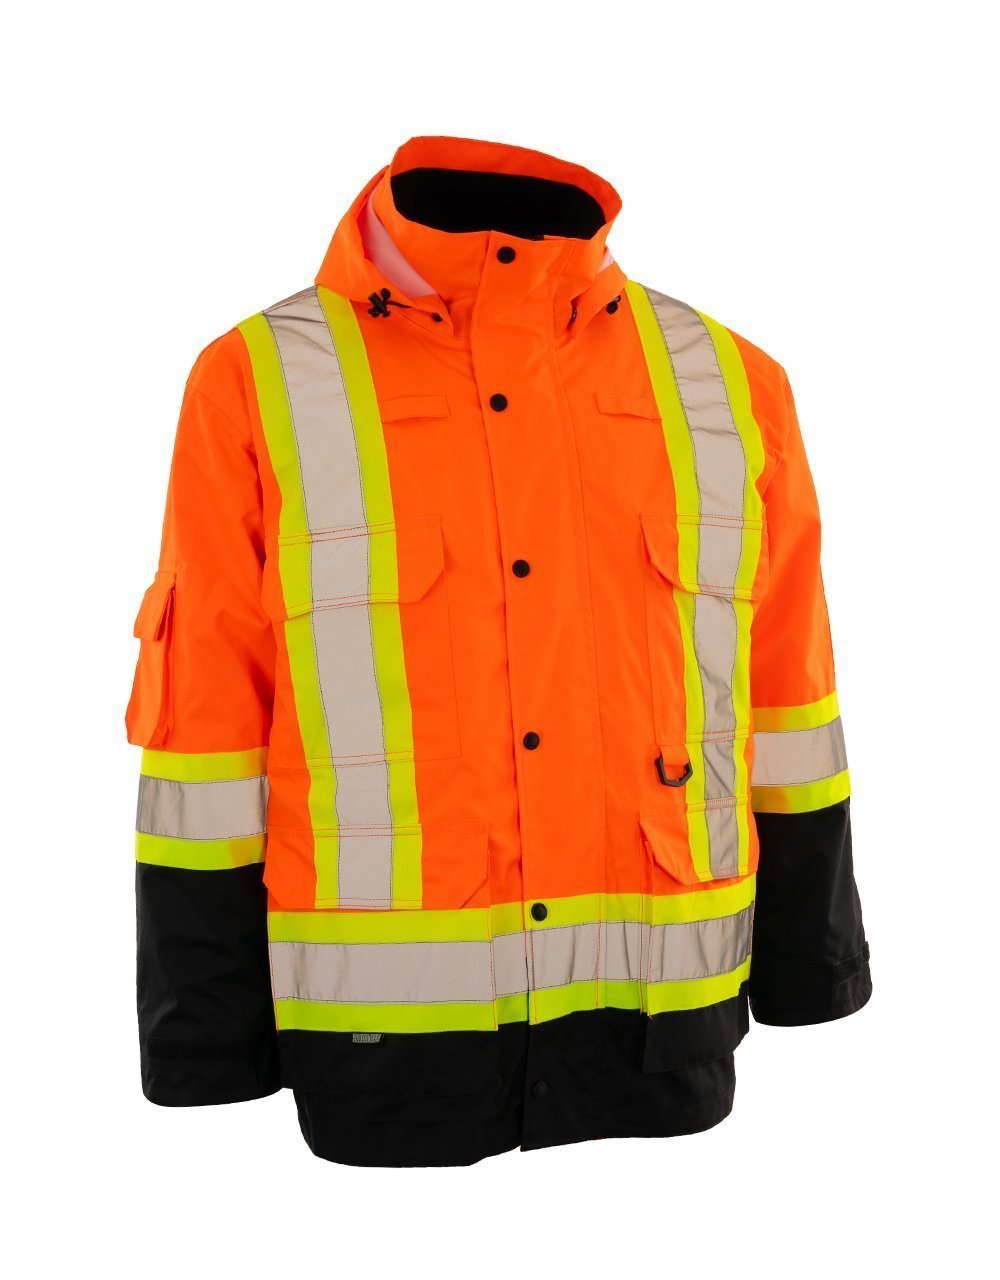 Forcefield Re-Engineered 4-in-1 Hi Vis Safety Parka - Rumors Safety Zone